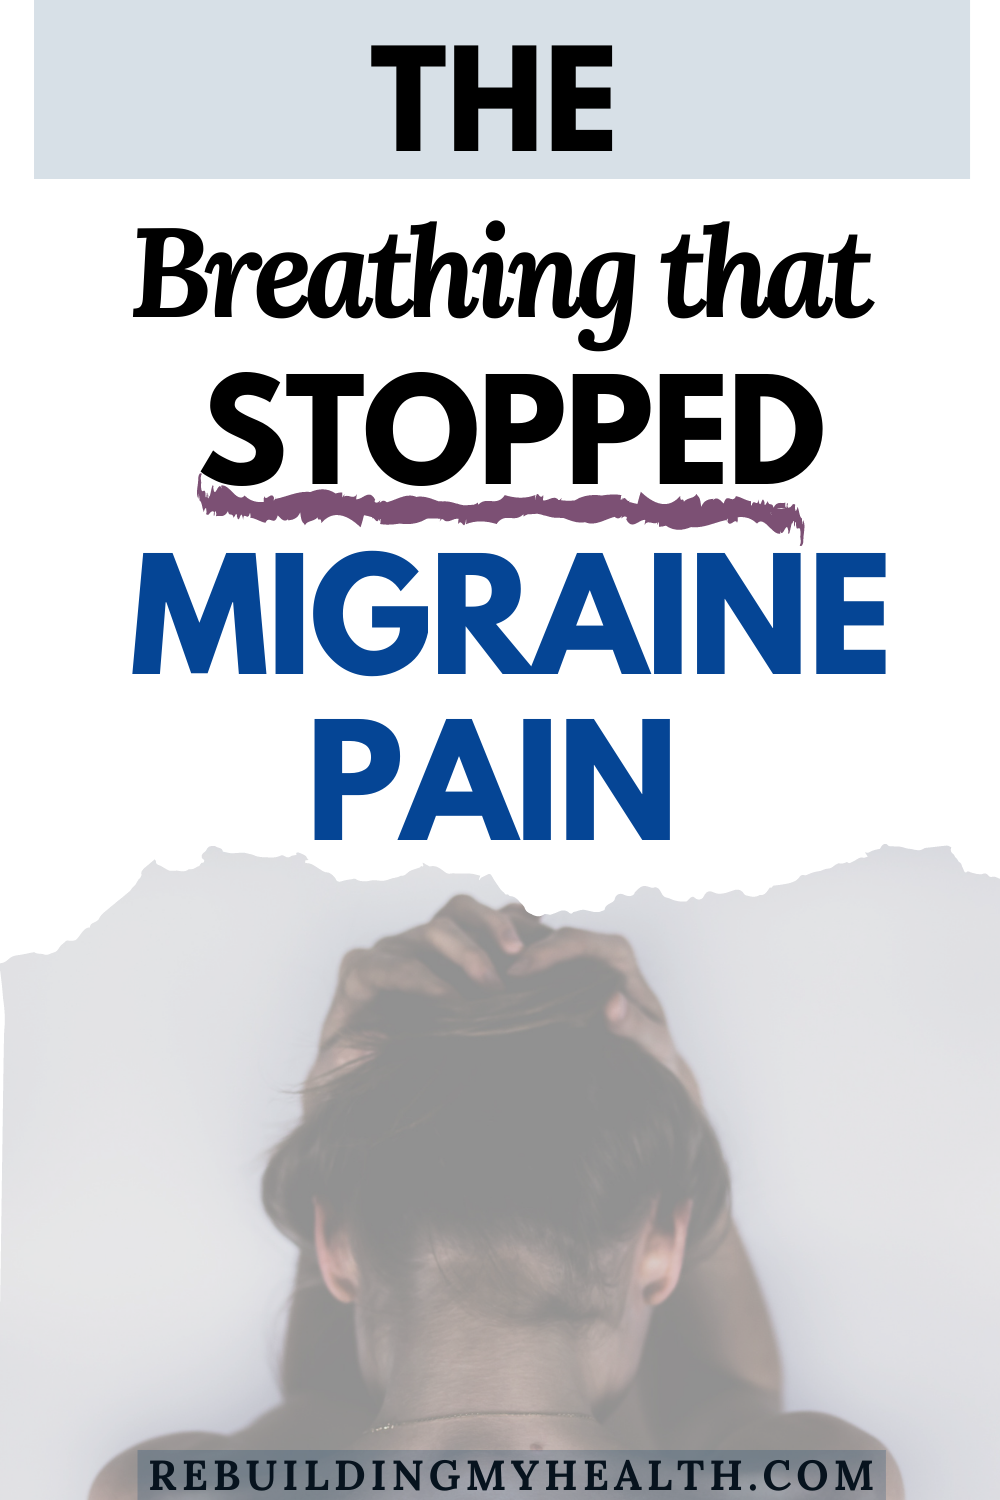 After 22 years of near-constant migraine pain, Aja tried breathing for migraines. Within two weeks, her migraine headaches decreased by 80-90 percent.